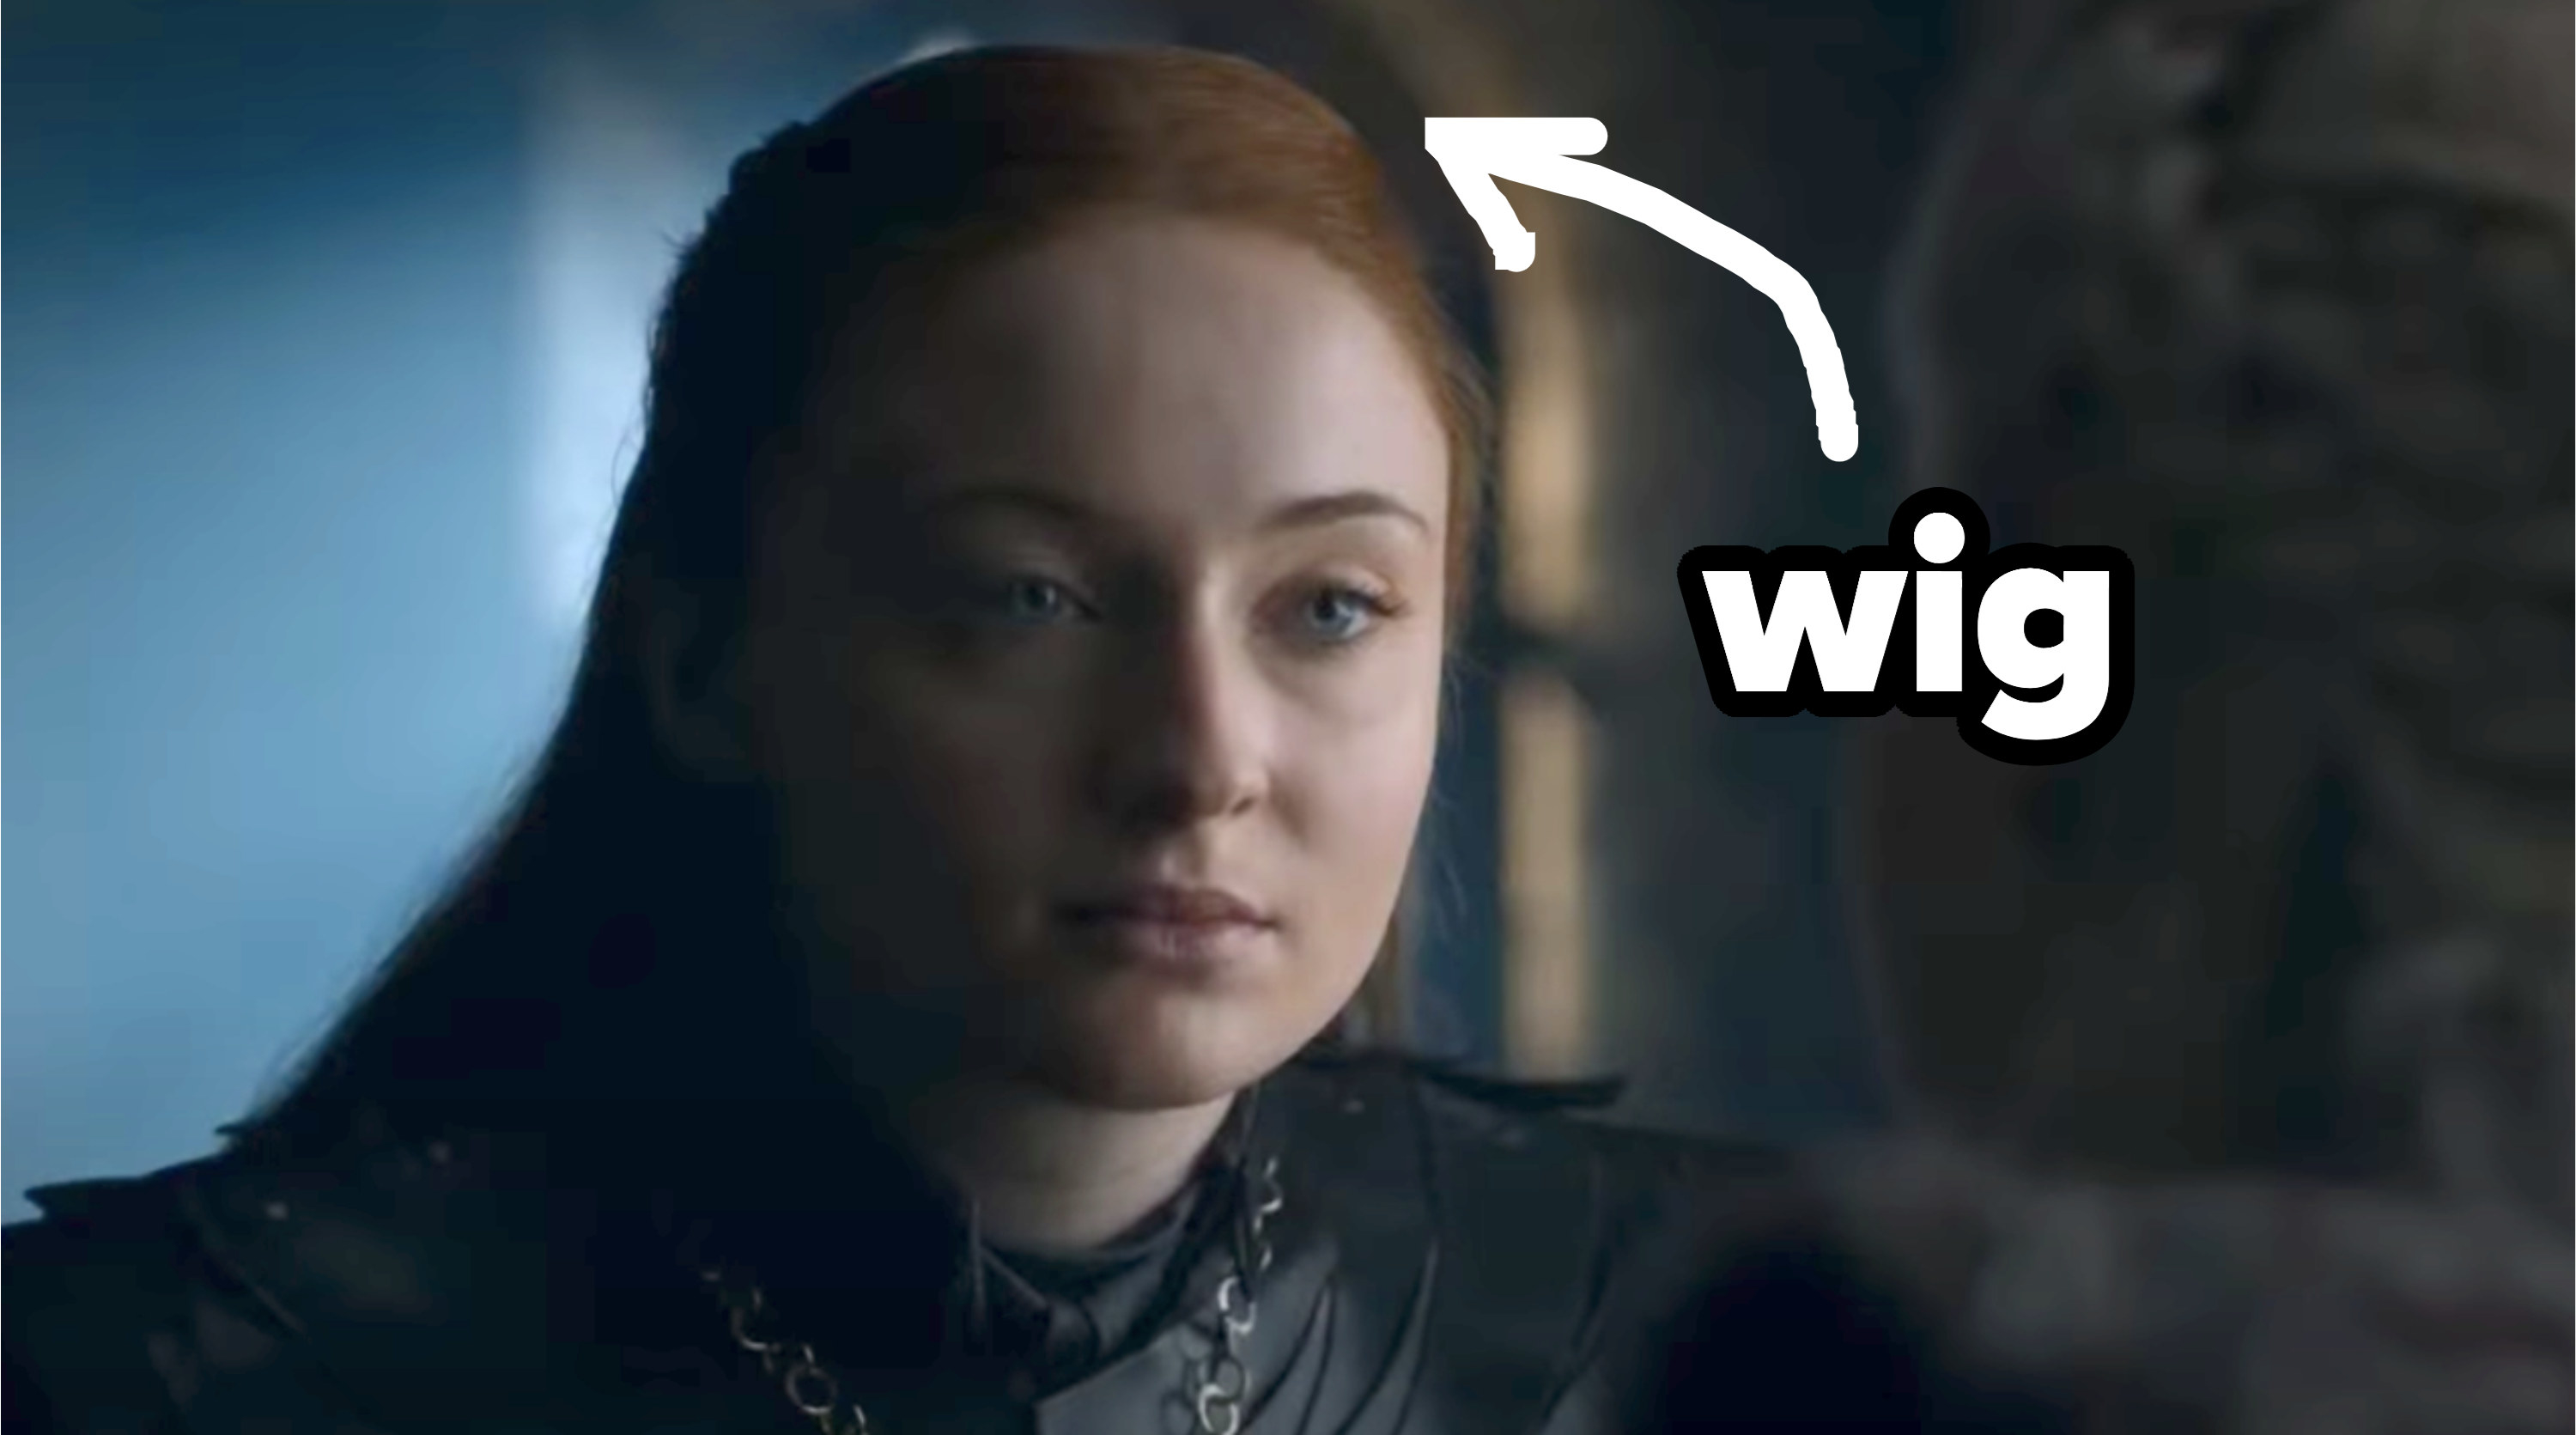 Sansa on Game of Thrones wearing a wig